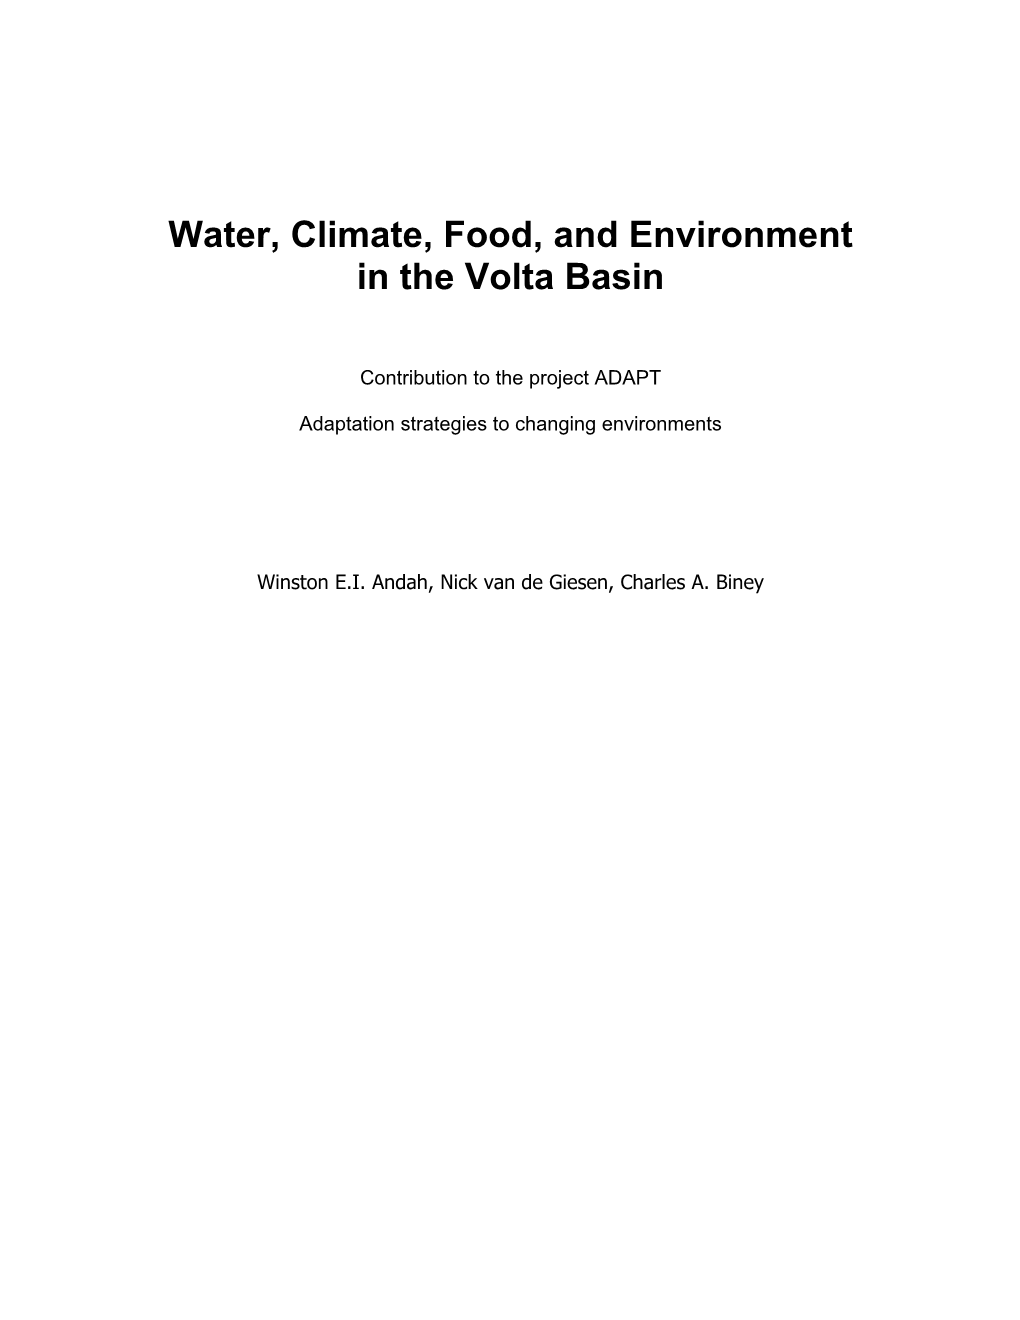 Water, Climate, Food, and Environment in the Volta Basin